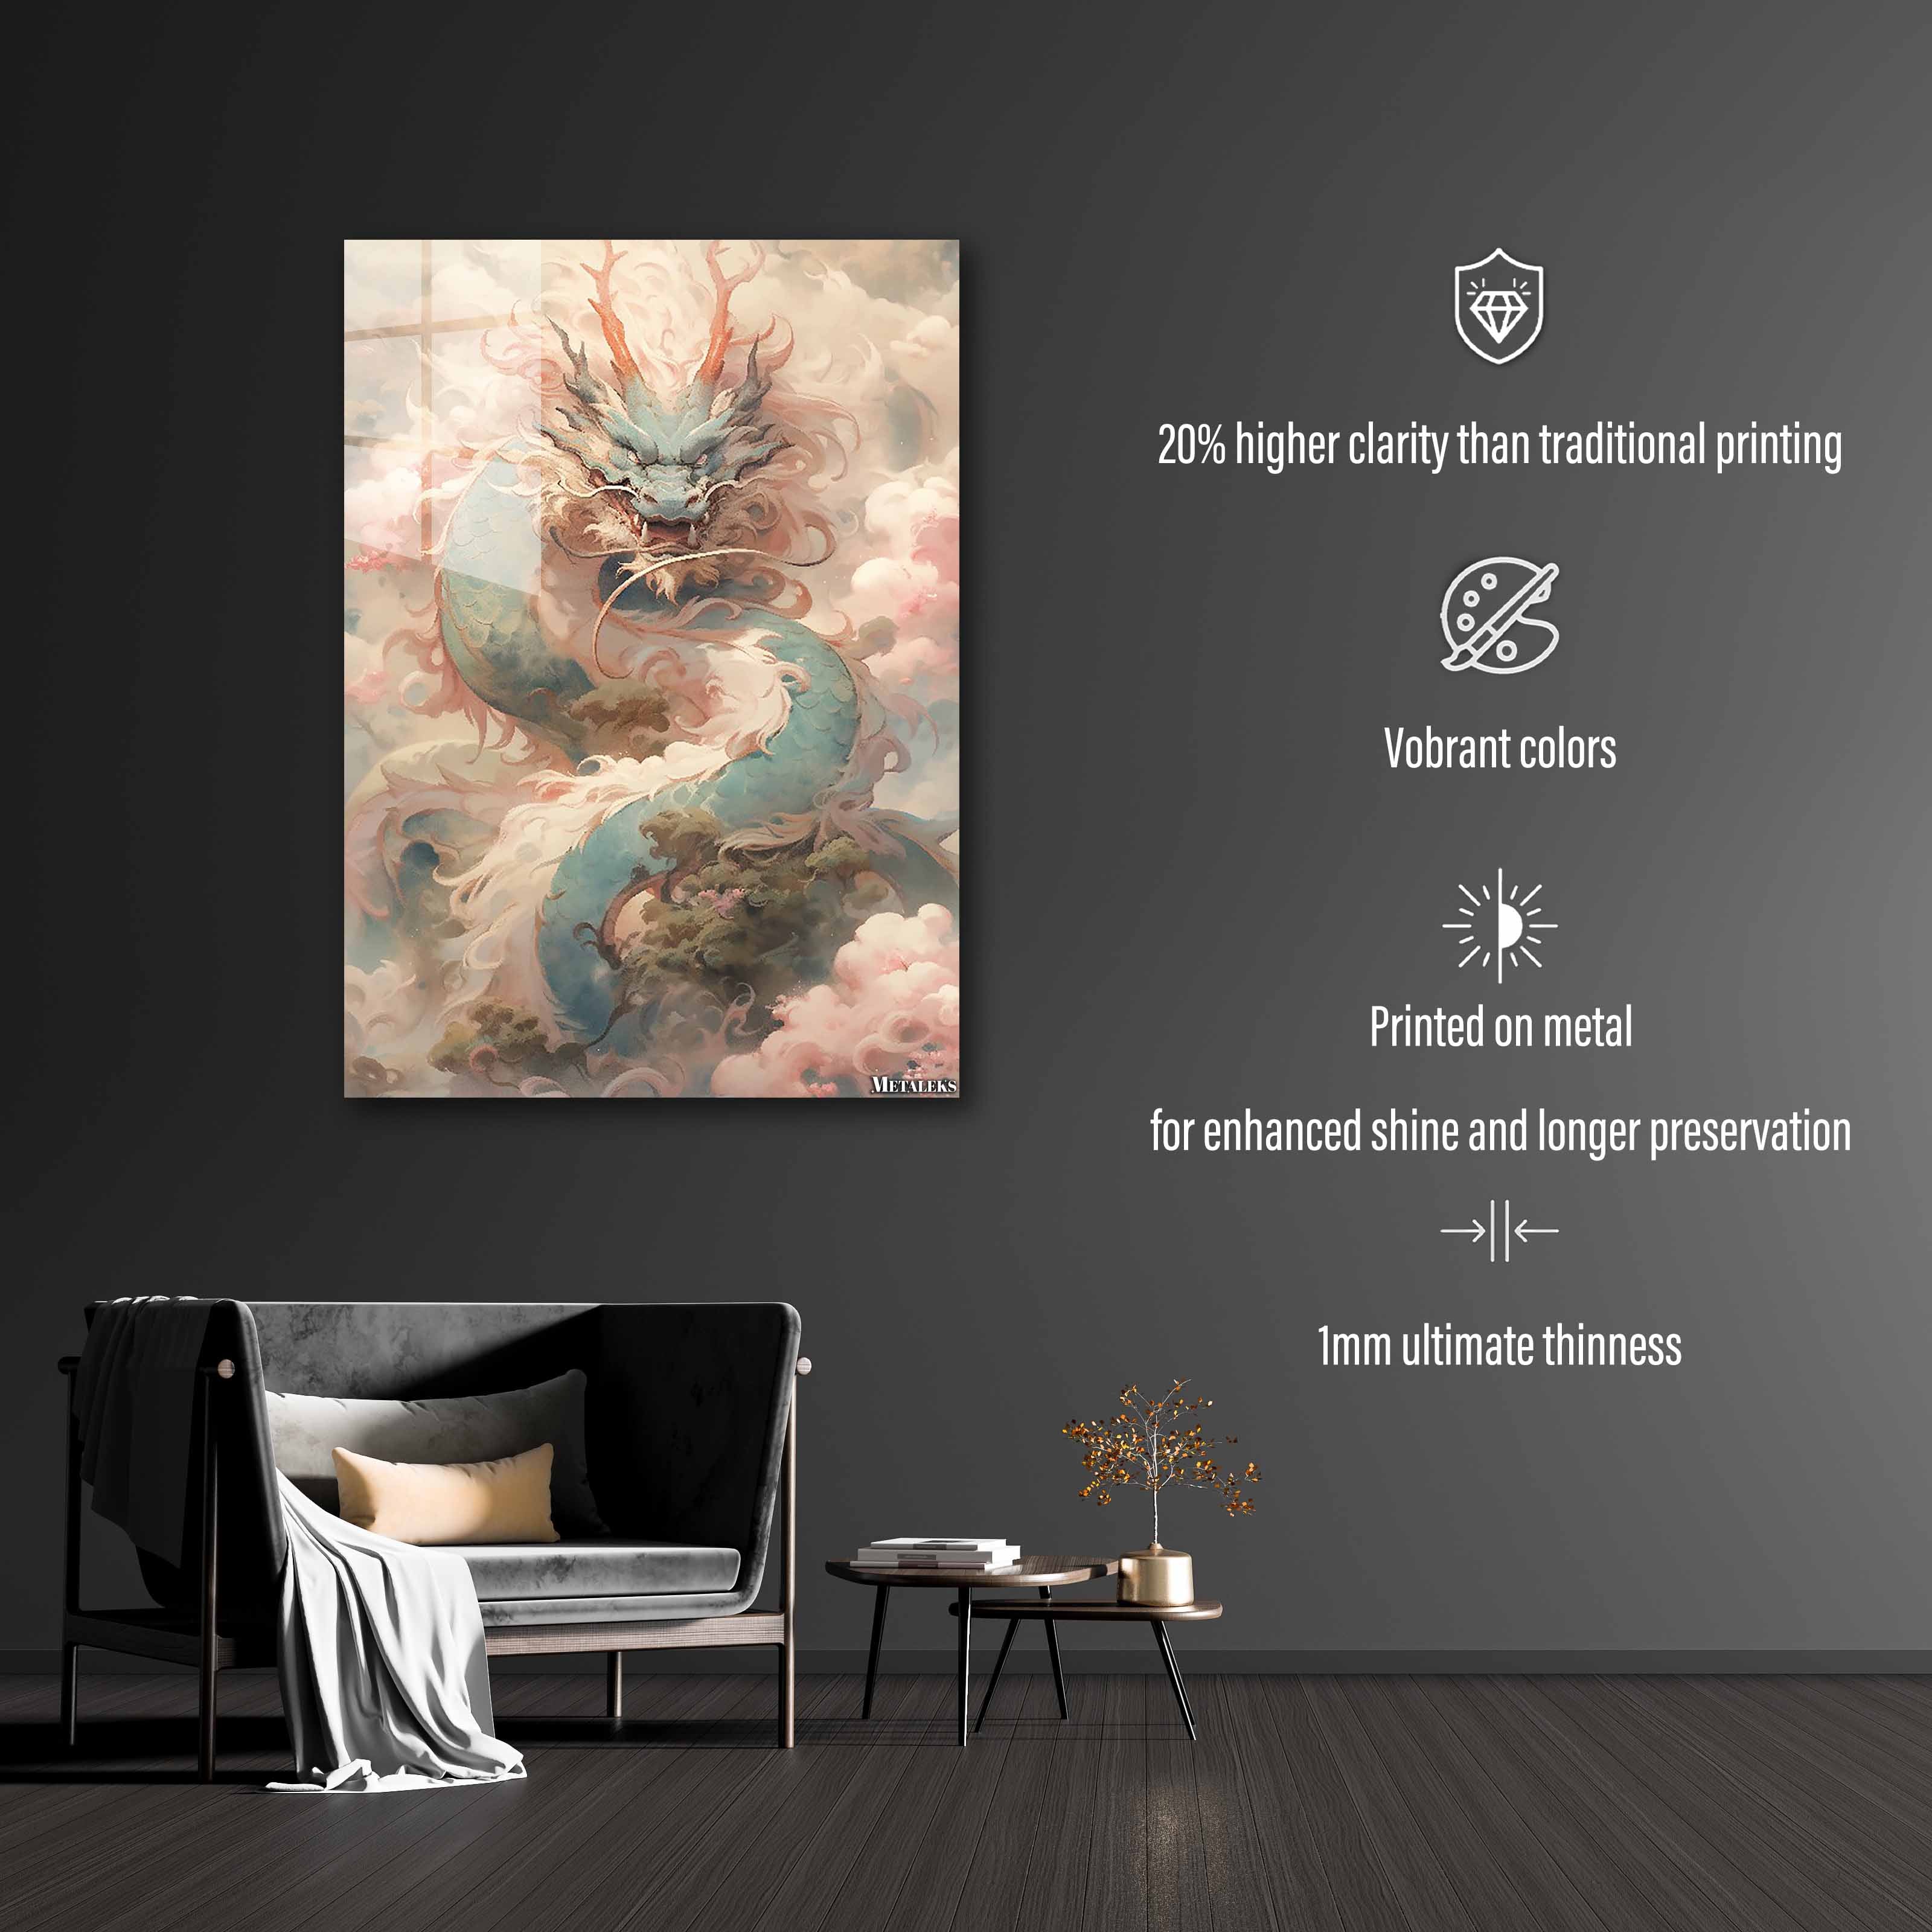 Chinese dragon	-designed by @Amateras Design